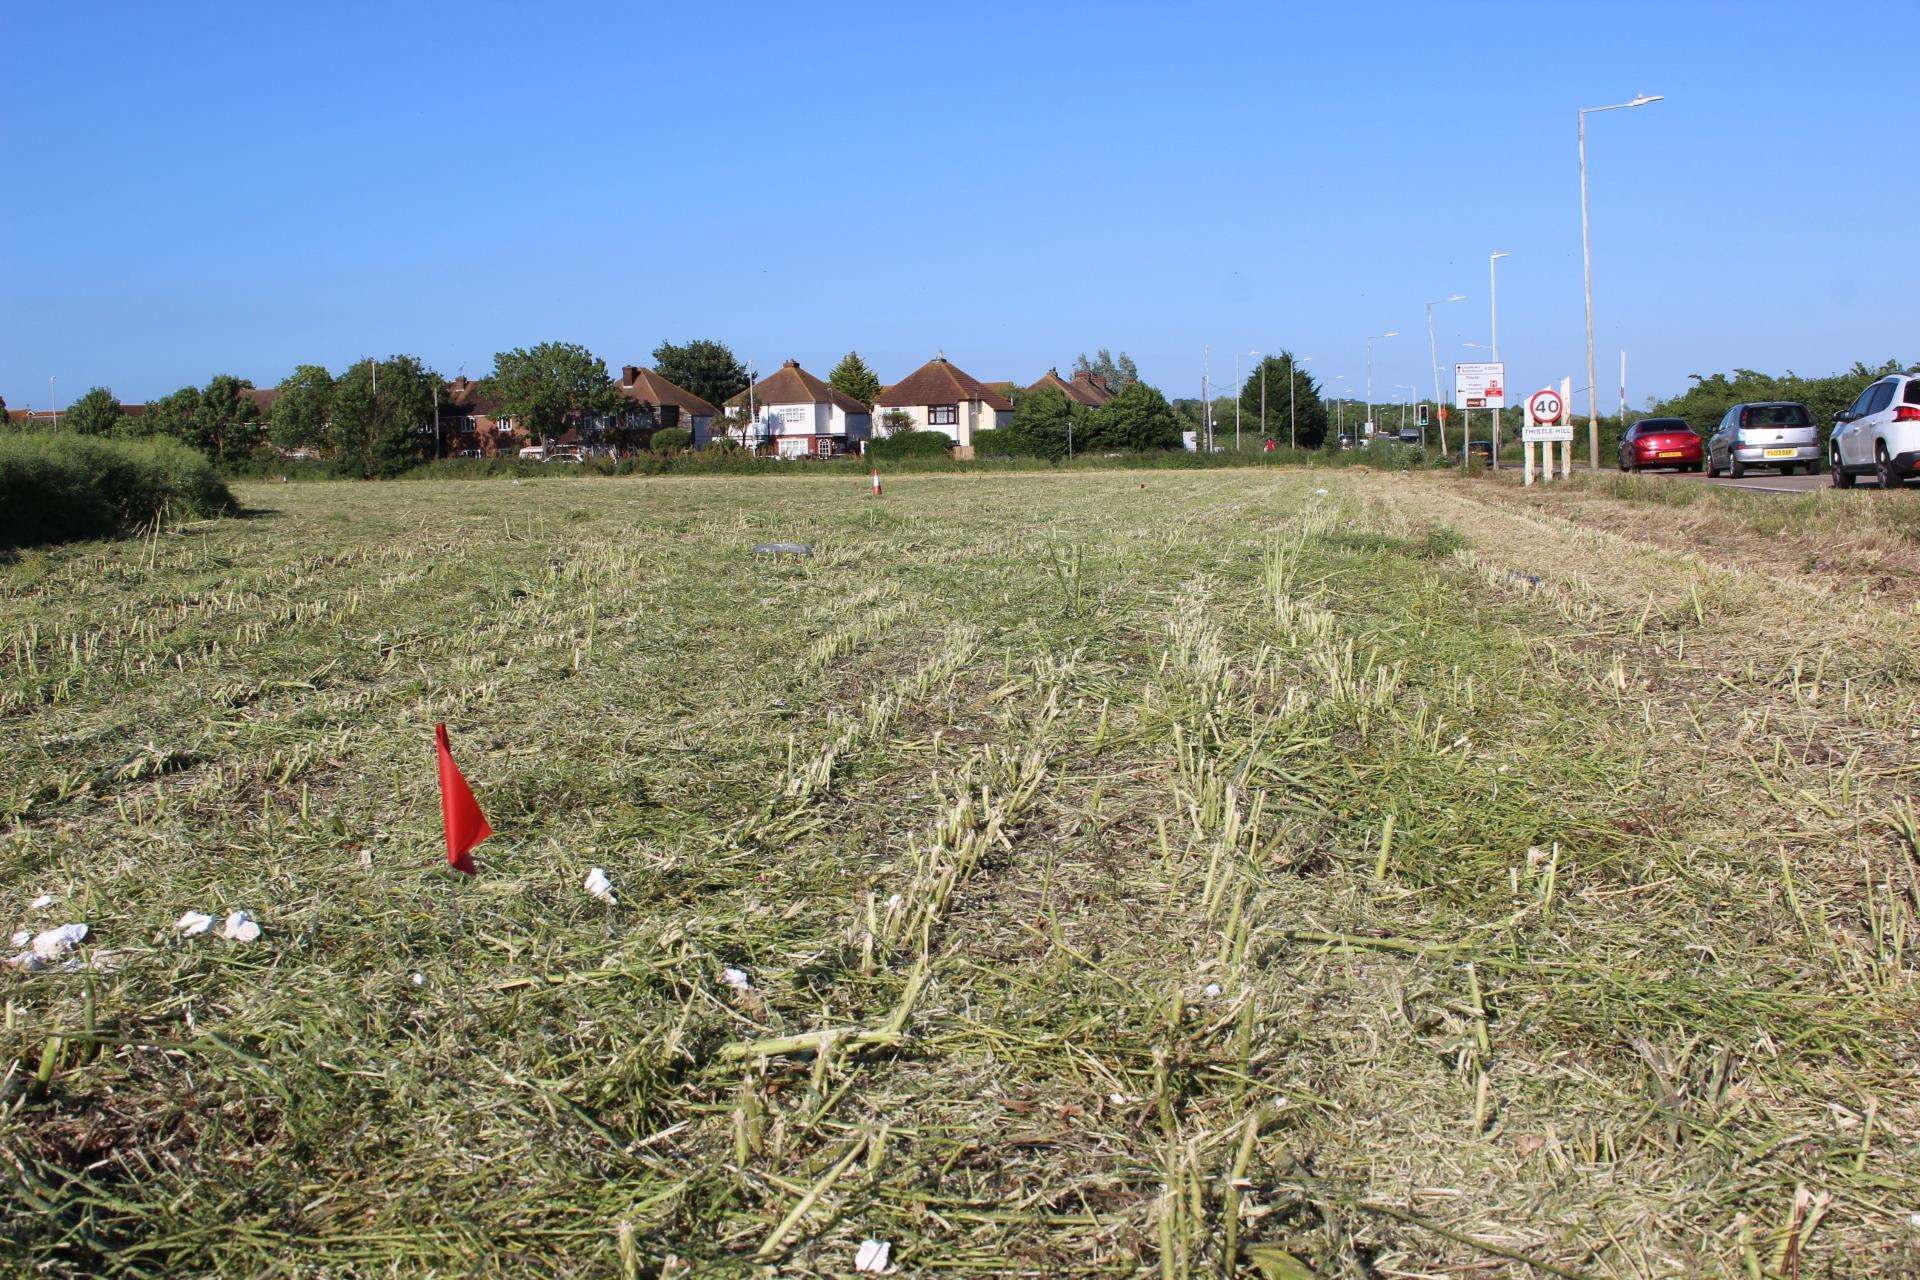 700 homes are planned for this field along the Lower Road at Minster, Sheppey